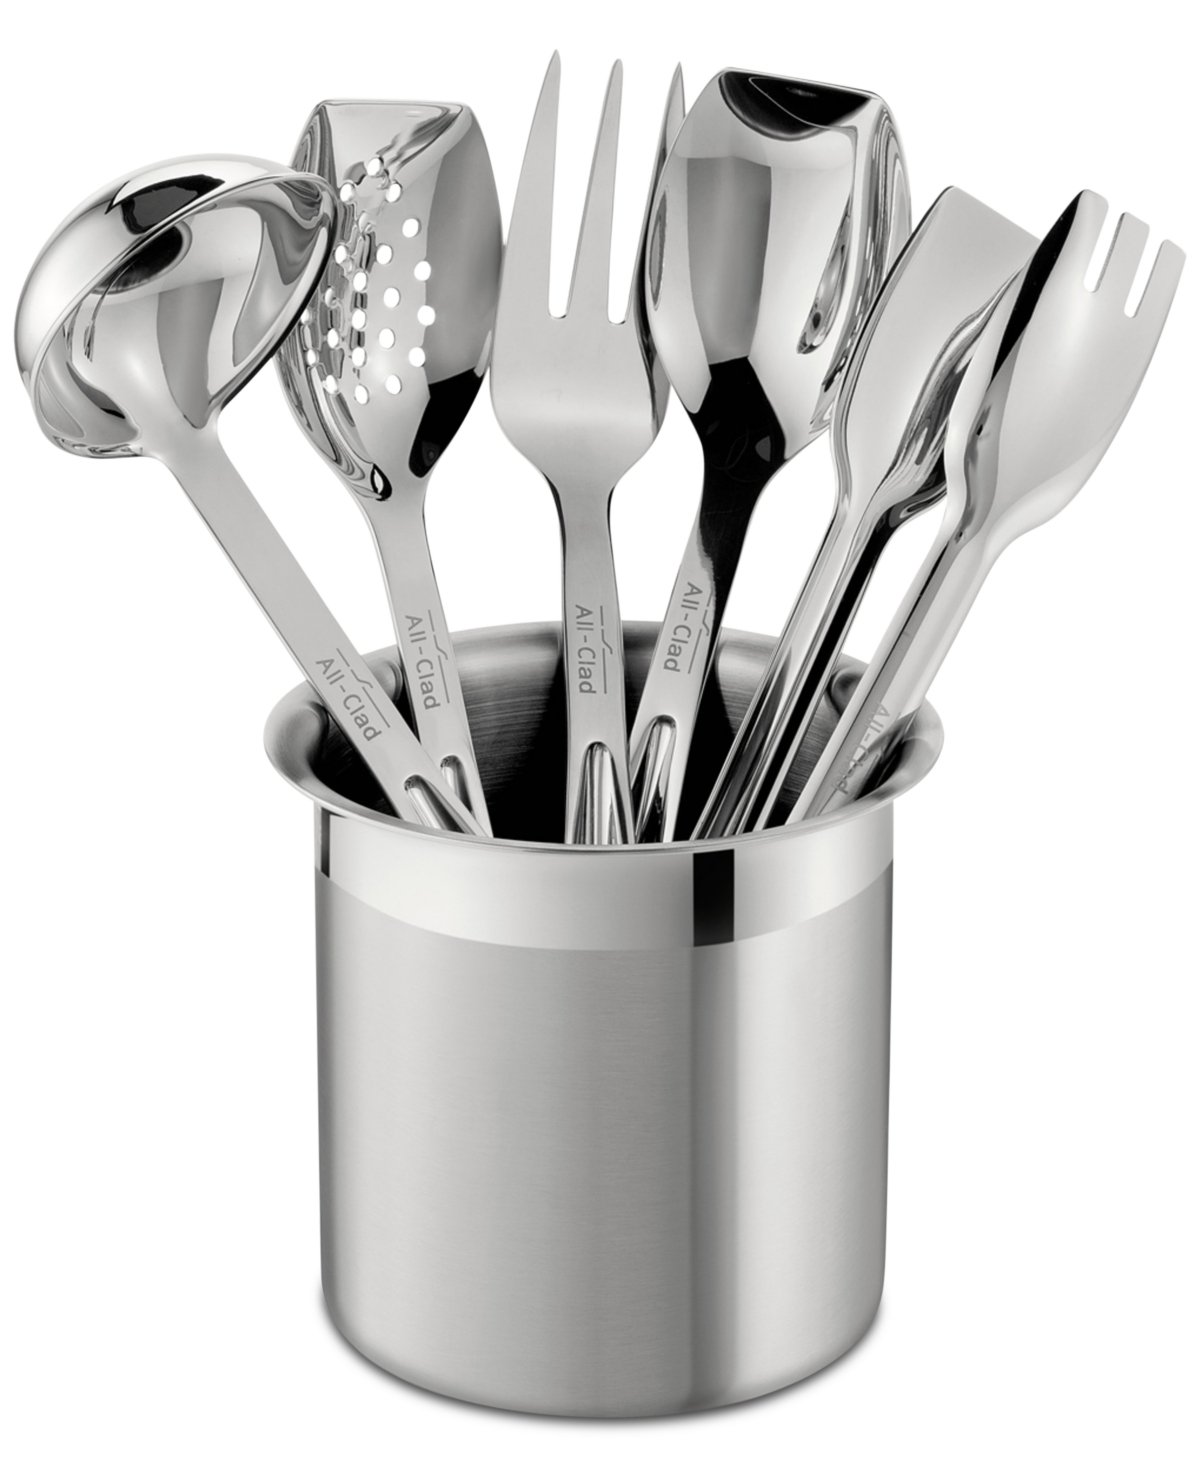 All-Clad Stainless Steel 6 Piece Cook and Serve Kitchen Utensil Crock Set